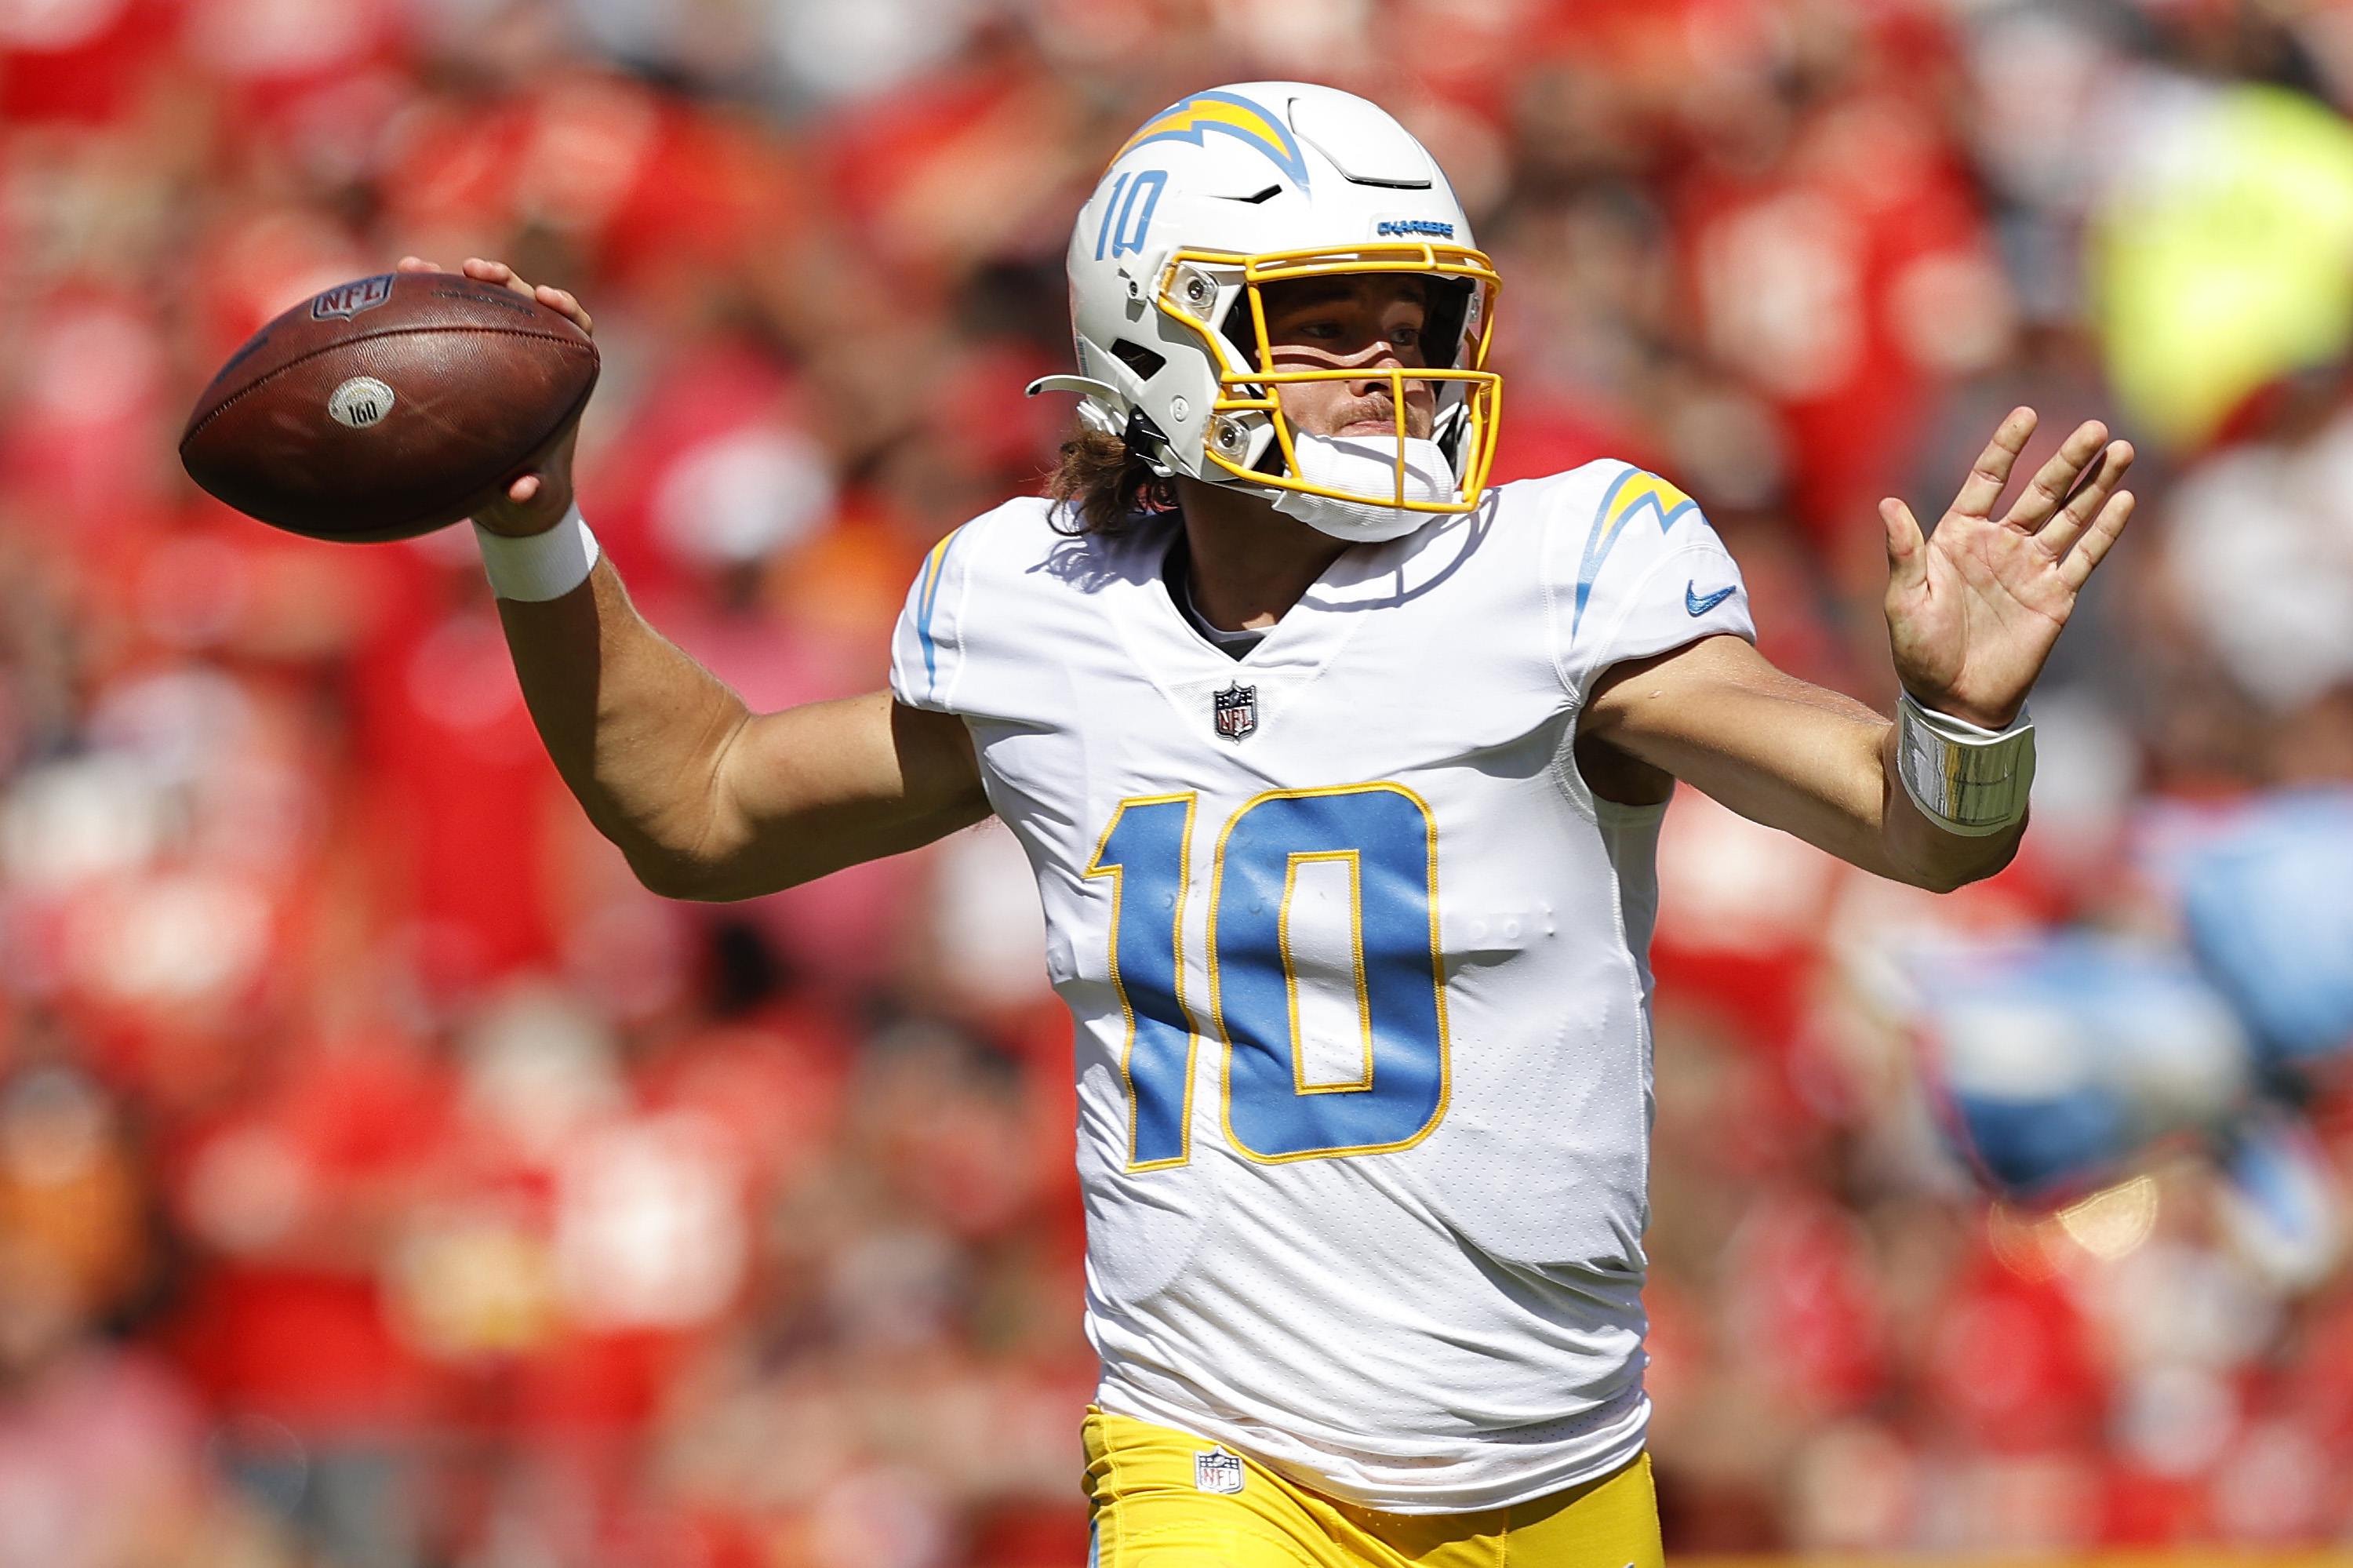 Los Angeles Chargers at Kansas City Chiefs on September 26, 2021